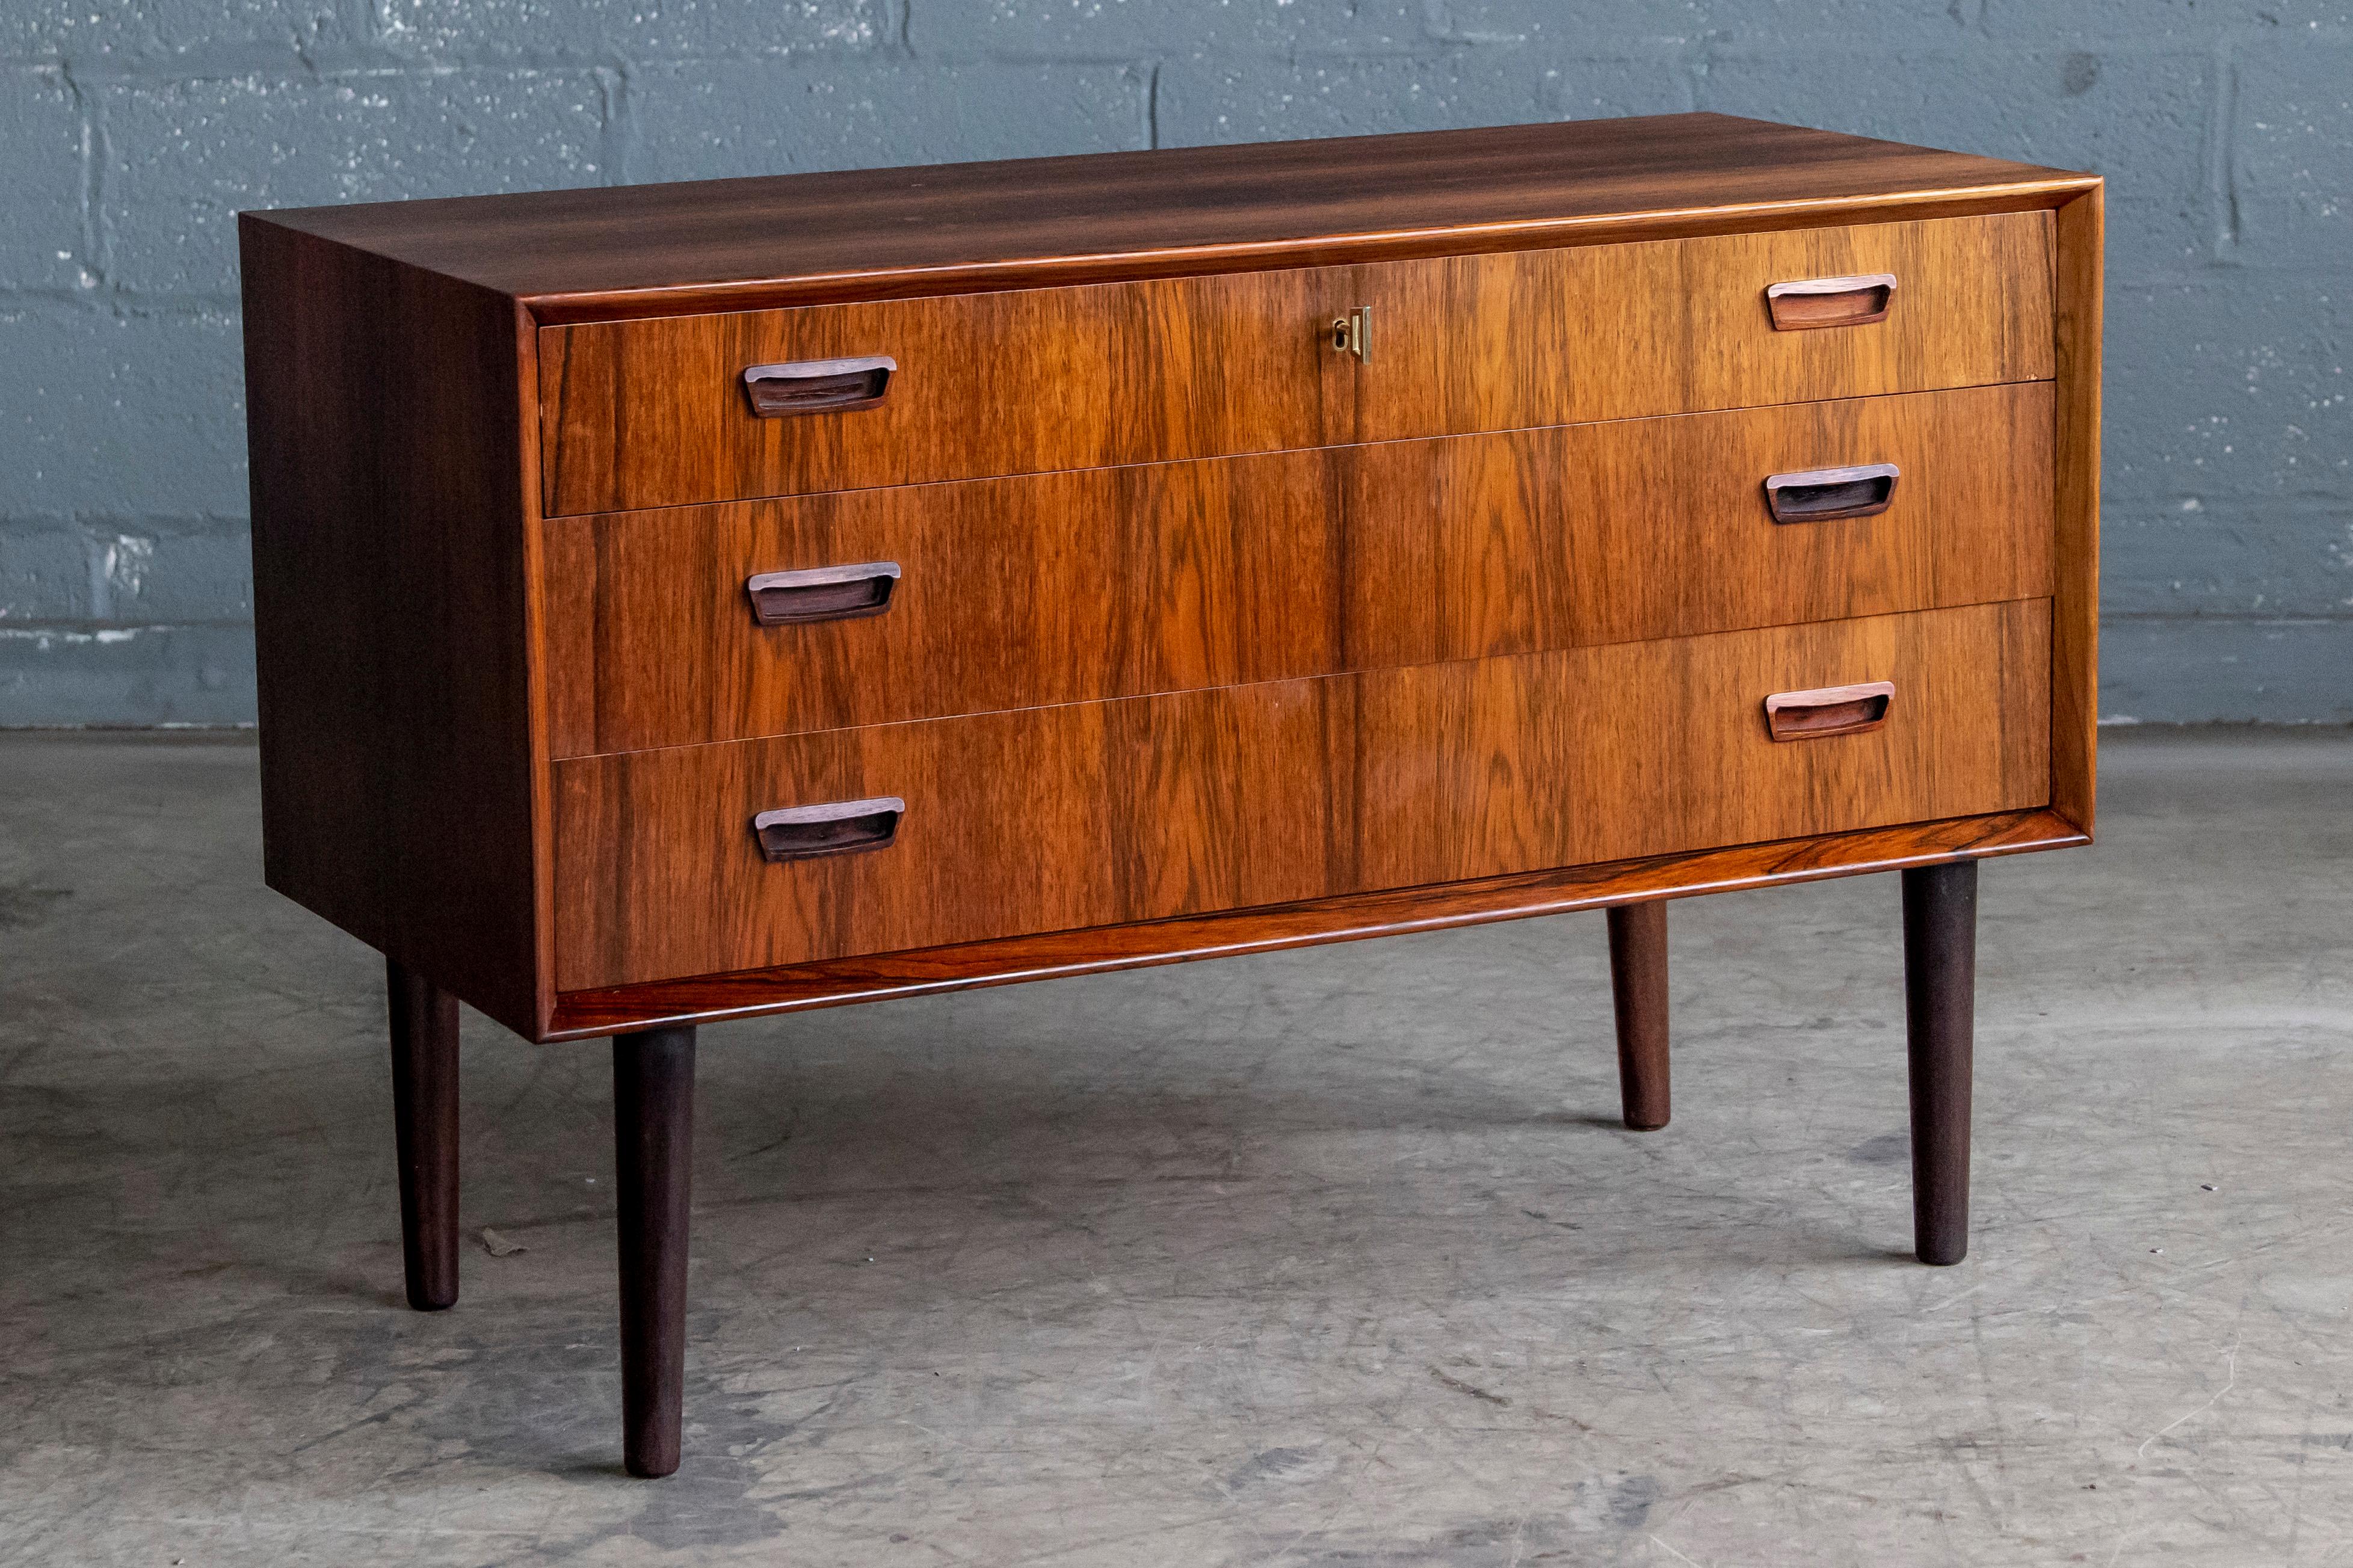 Beautiful classic Danish midcentury dresser or chest of drawers made from rosewood probably circa 1960 by Bornholm Mobler and Designer Johannes Sorth (market on the back) Jewelry organizer in the top drawer. Very desirable size in rosewood veneers